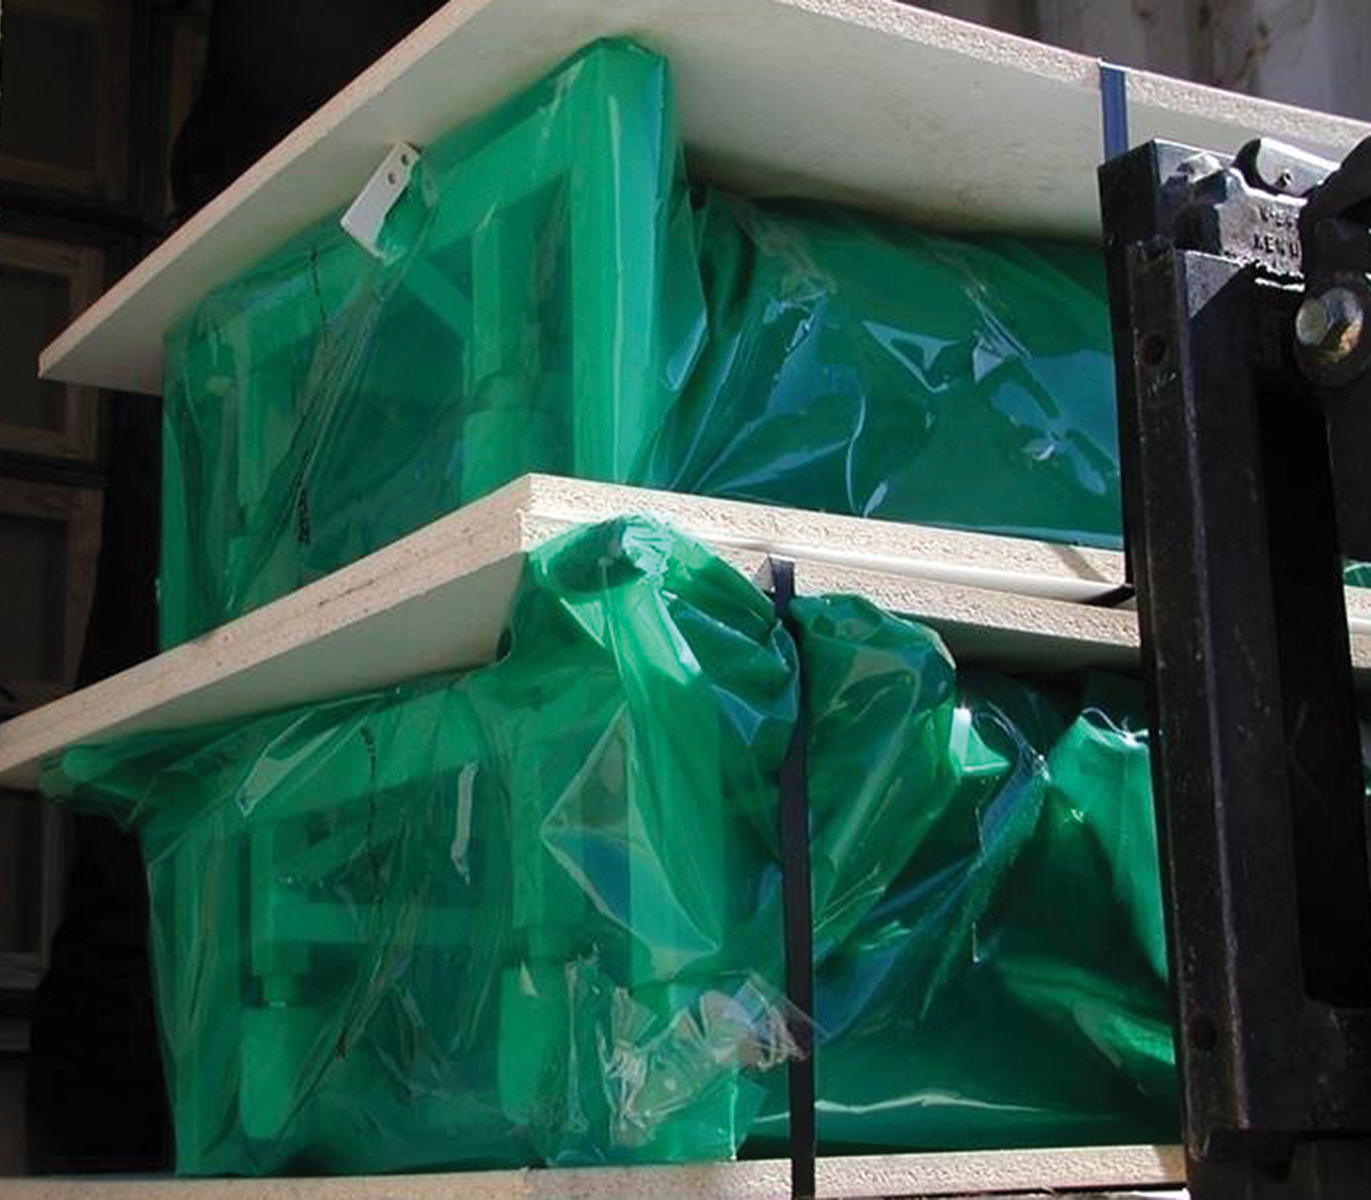 Download New Shrink Wrap Designed to Protect All Metals | OutdoorHub